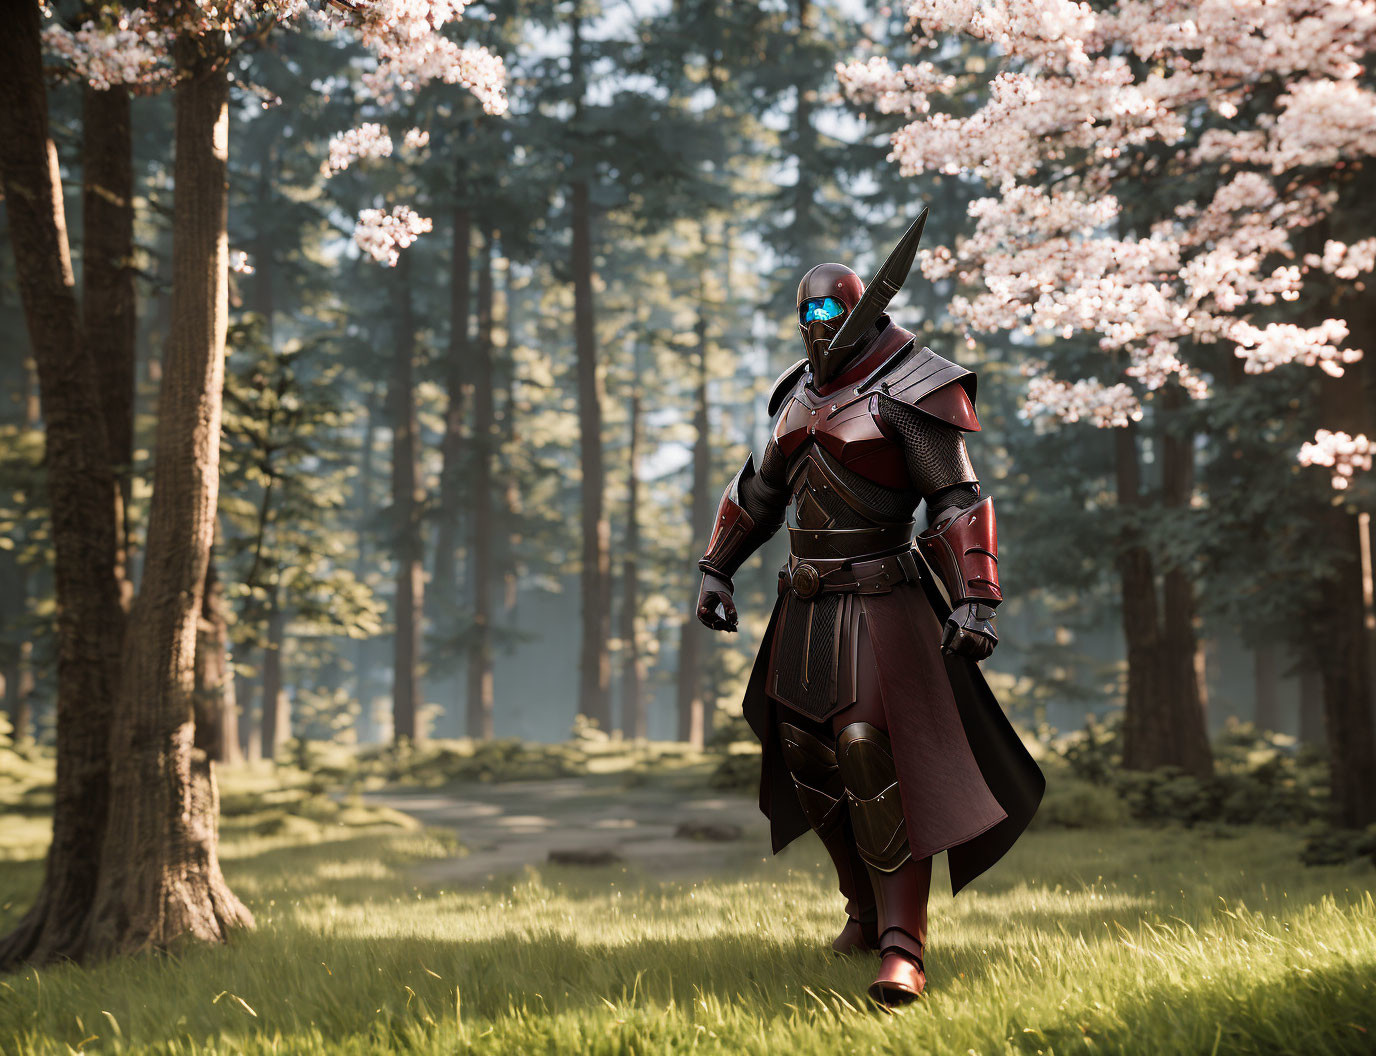 Futuristic knight in red and black armor in serene forest with cherry blossoms